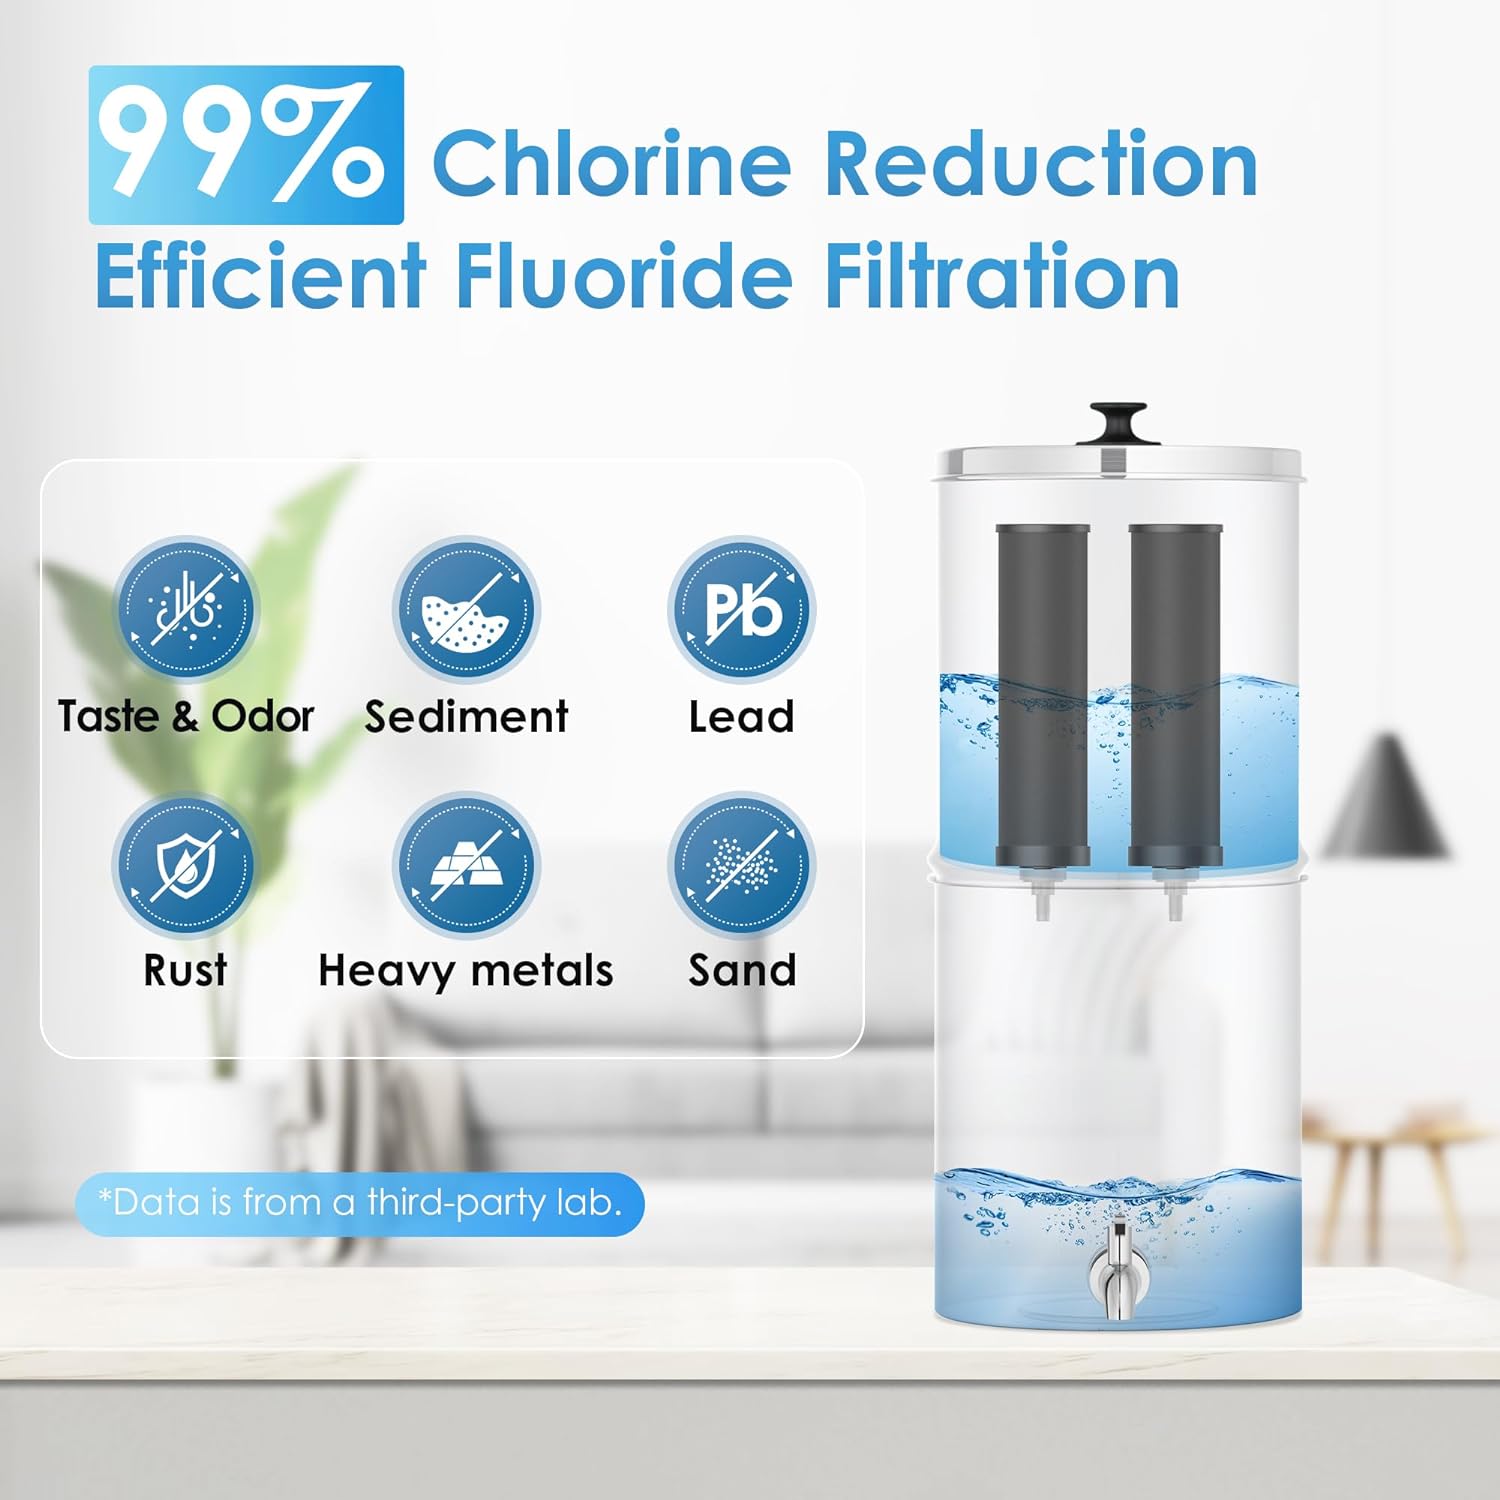 Gravity Water Filter System, NSF/ANSI 42&372 Certified Black Carbon Filters, Reduce Lead and Up to 99% Chlorine, 2.25G, for Home, Camping, RVing, Off-Grid, Emergencies, AQ-TN-A